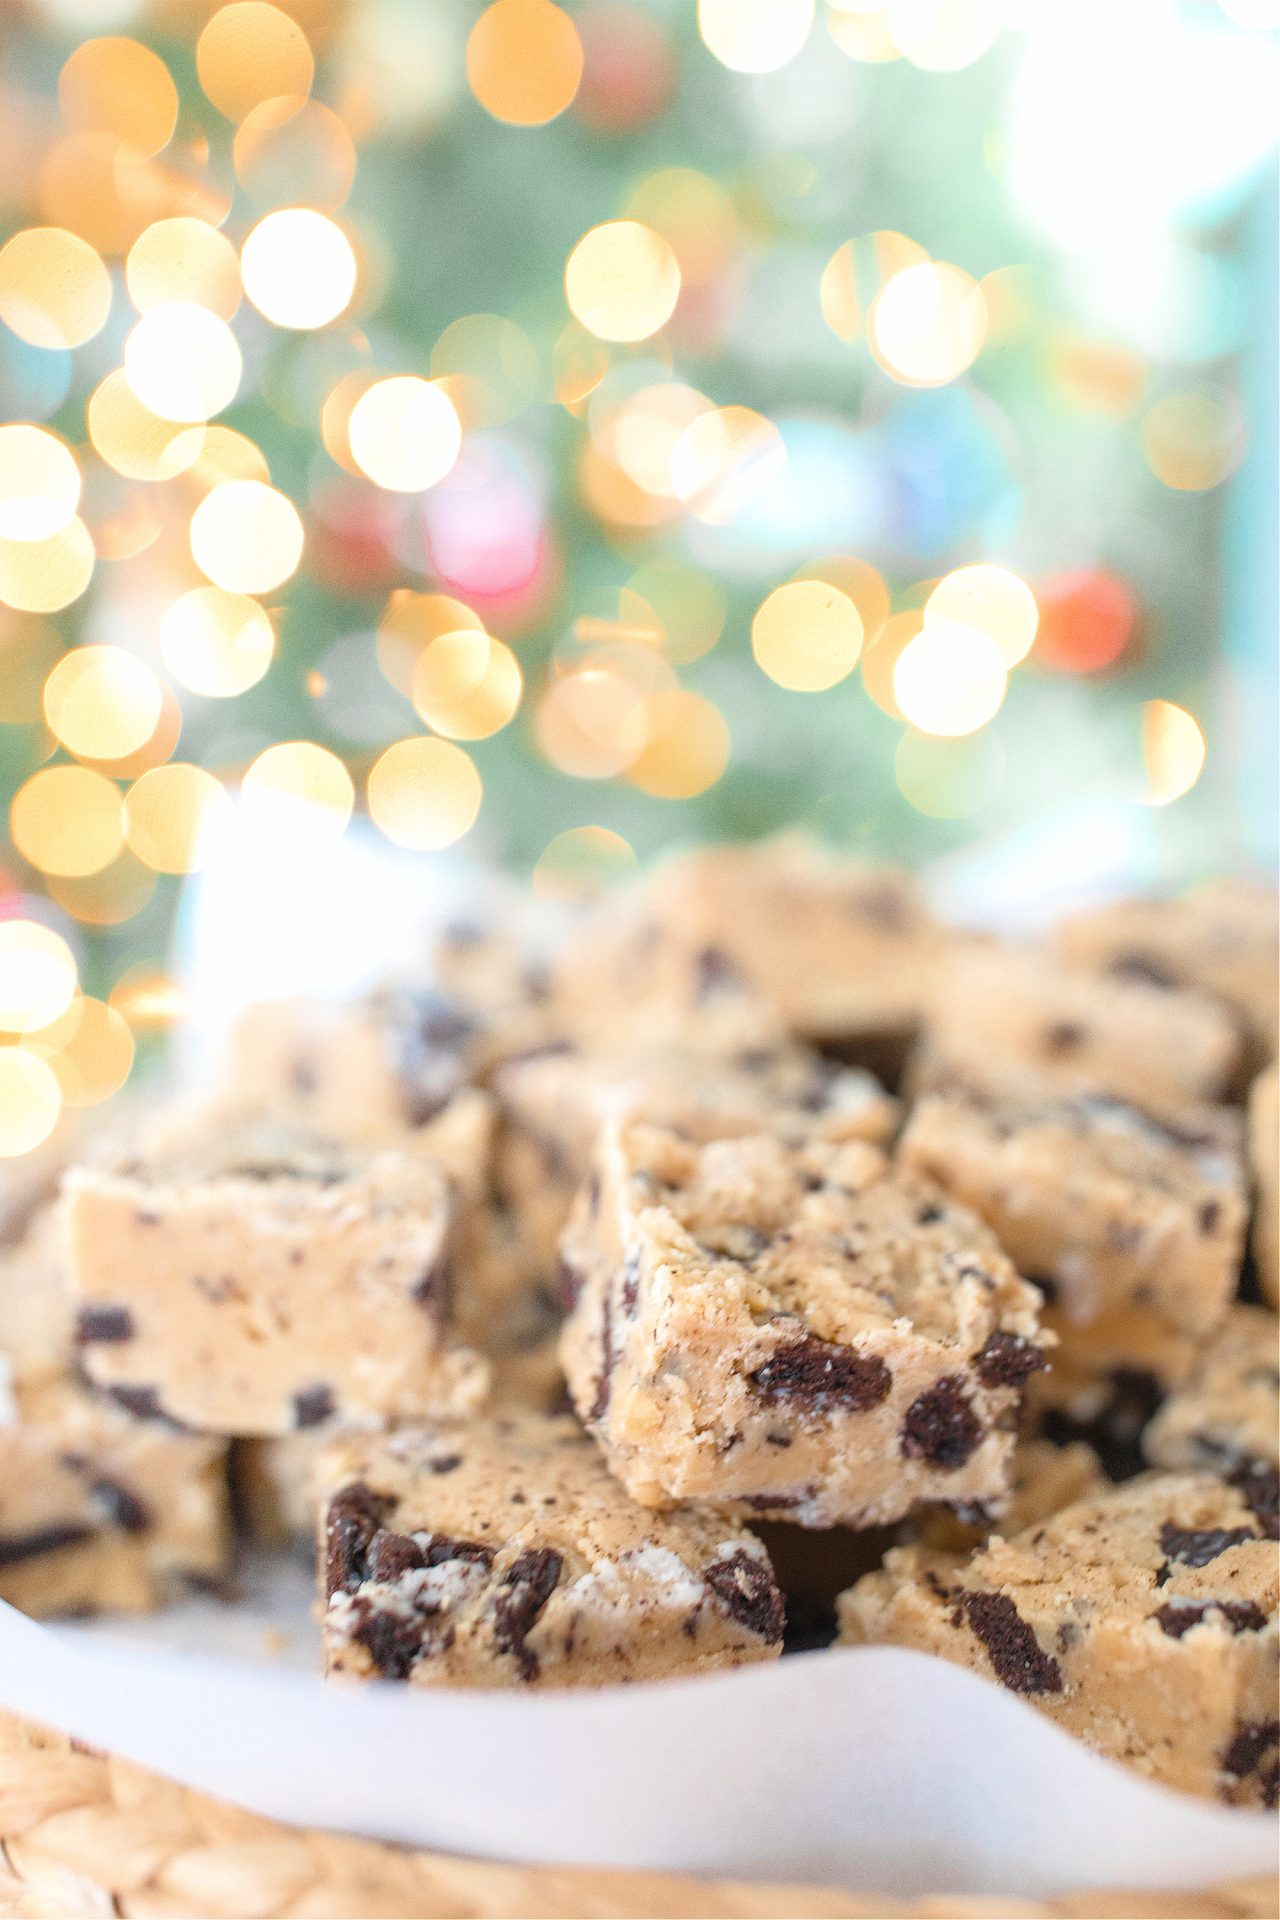 the best peanut butter fudge, peanut butter fudge with Oreos, cookies and cream peanut butter fudge, the best fudge on the internet, award winning peanut butter fudge, the best fudge recipe, easy peanut butter fudge, holiday recipes.